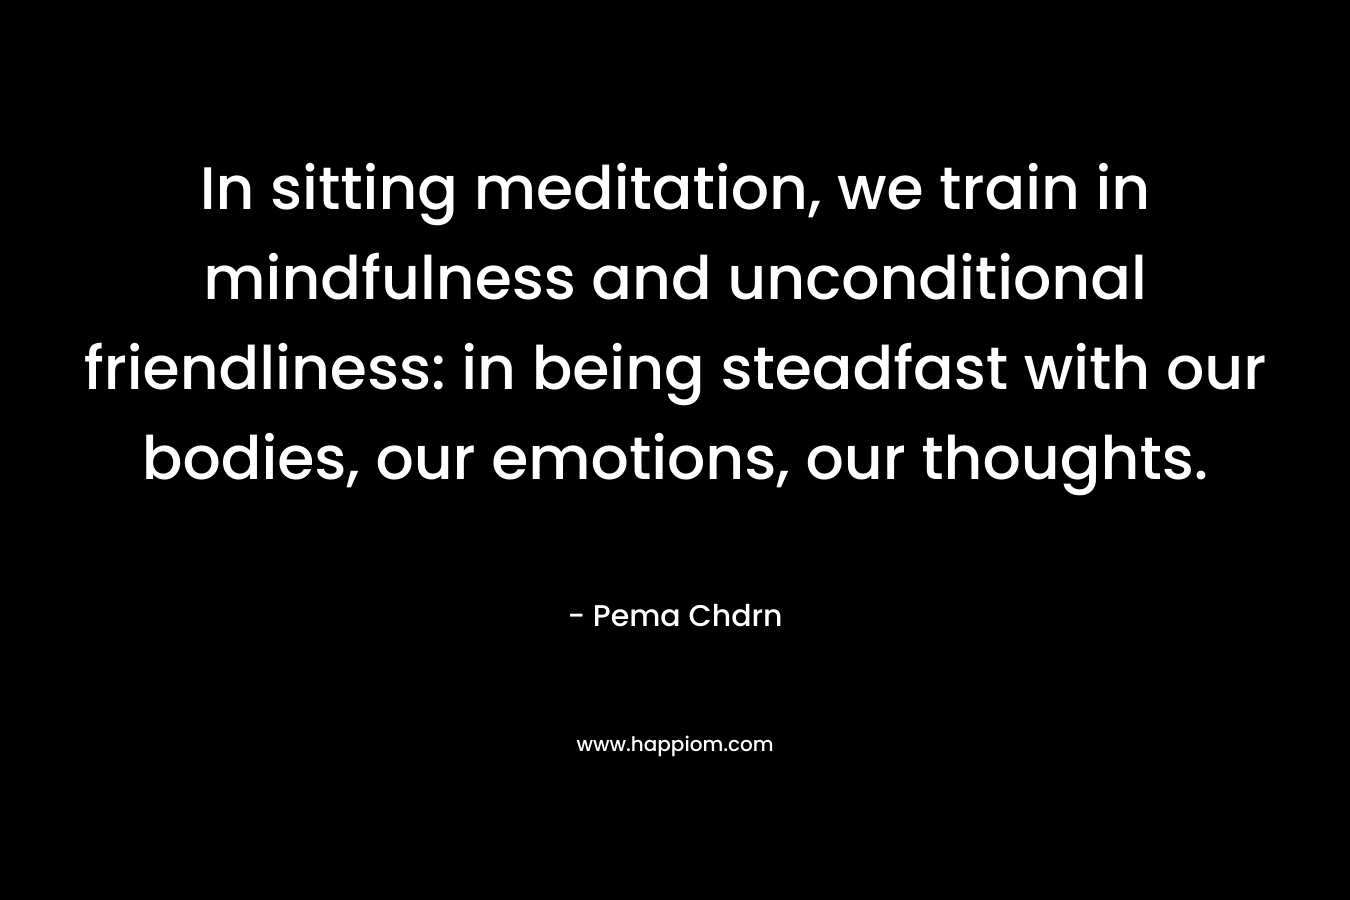 In sitting meditation, we train in mindfulness and unconditional friendliness: in being steadfast with our bodies, our emotions, our thoughts.